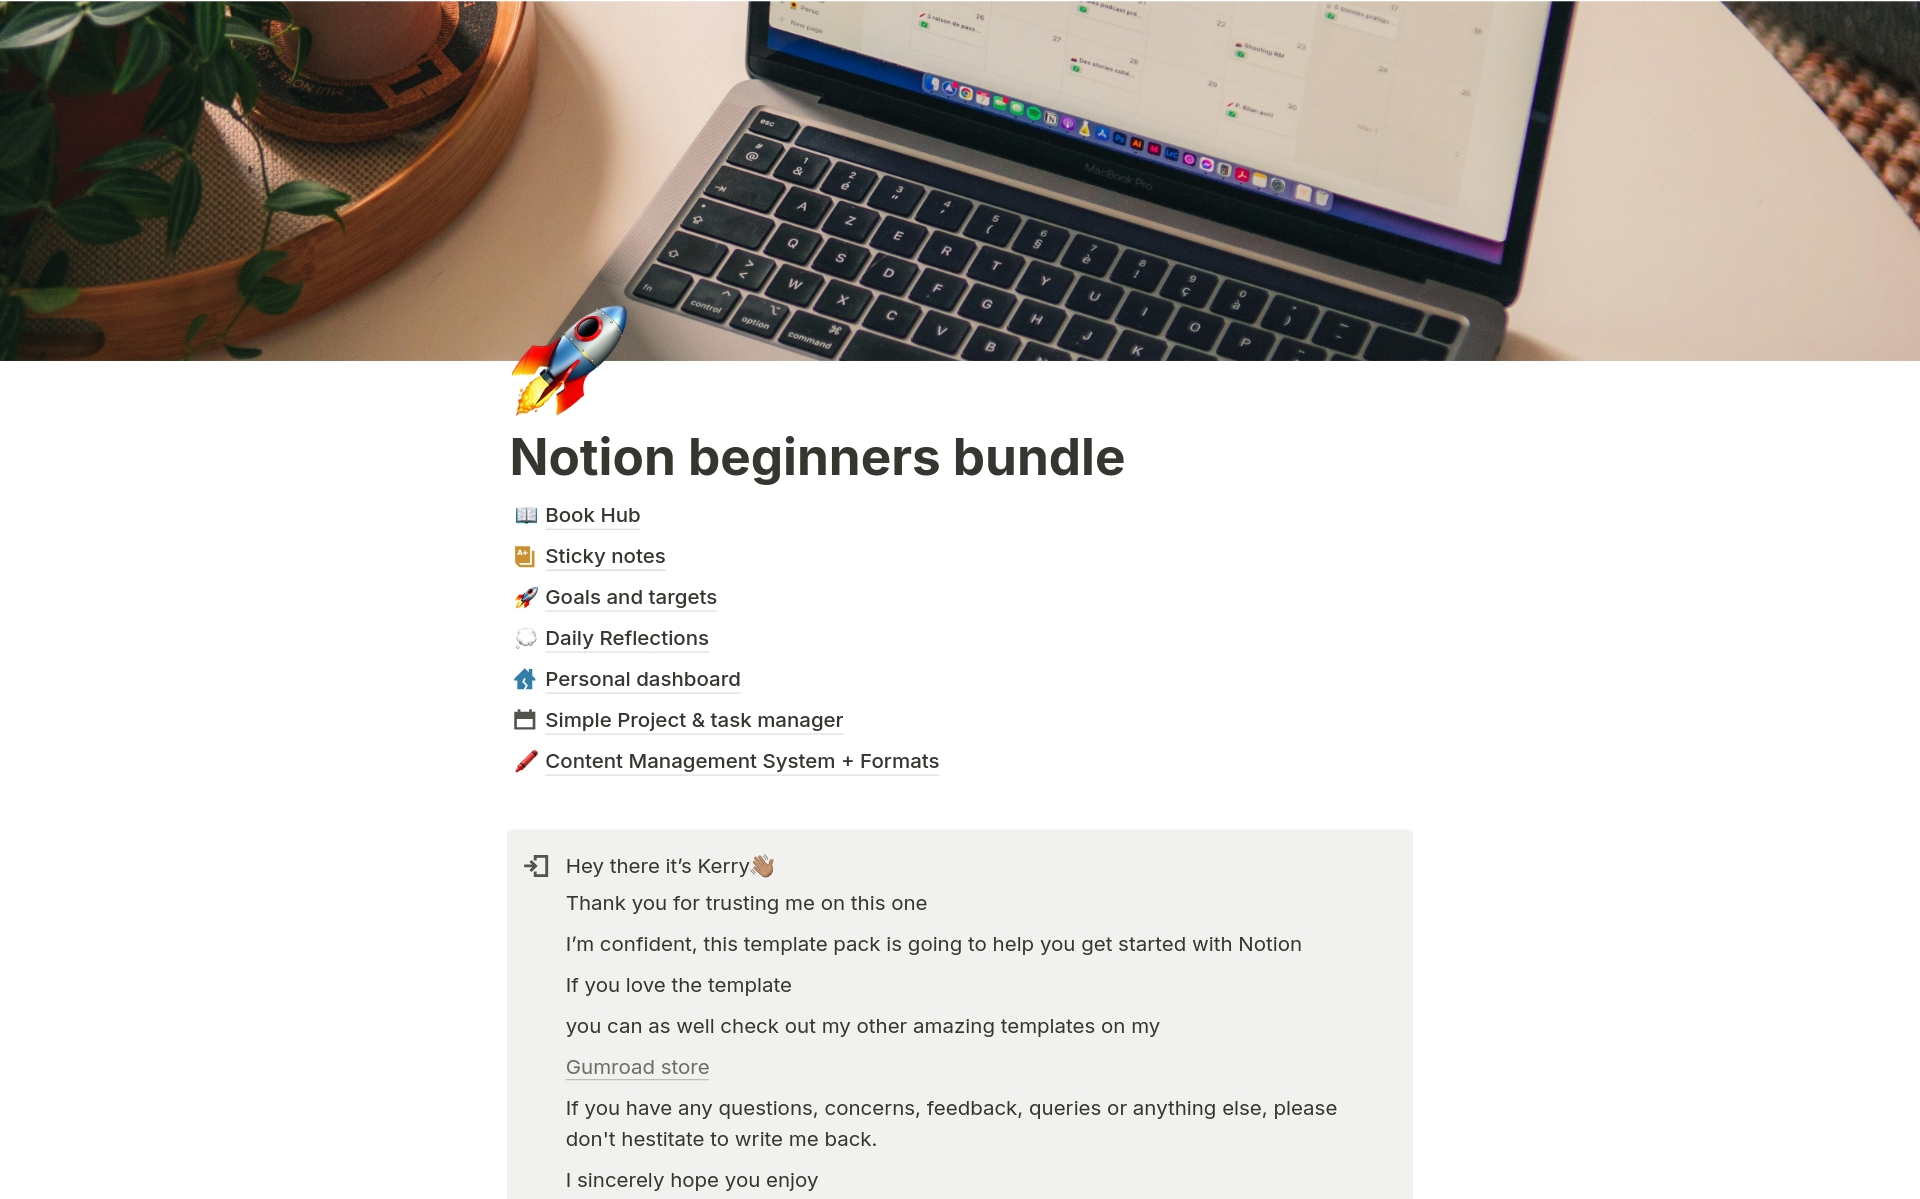 The ultimate starter pack for anyone looking to dive into the world of Notion